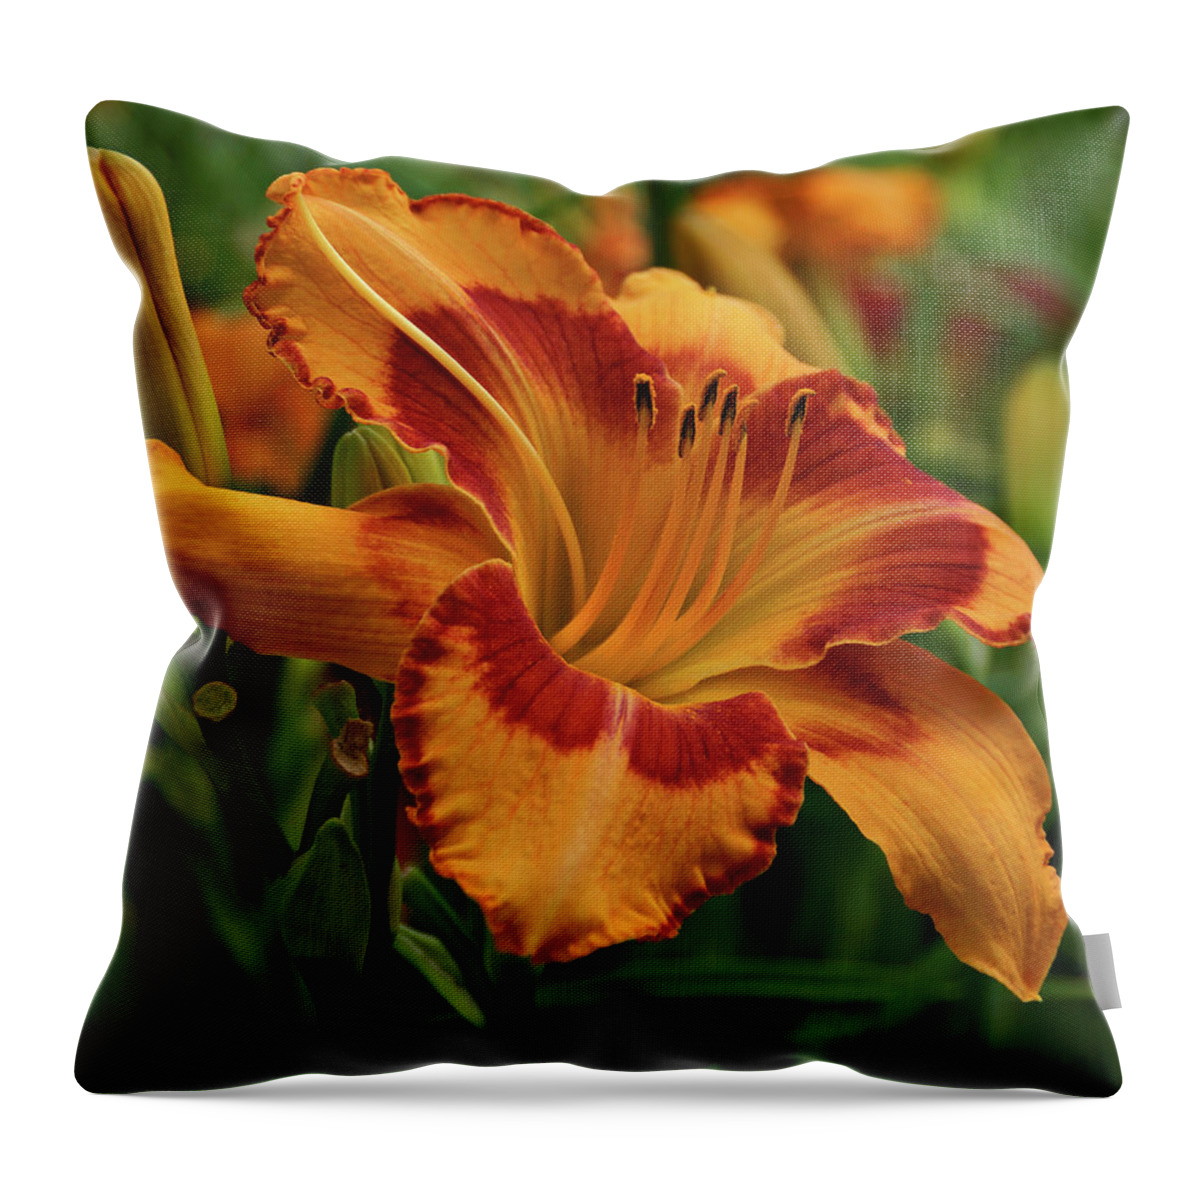 Daylilies Throw Pillow featuring the photograph Beautiful Daylily by Sandy Keeton